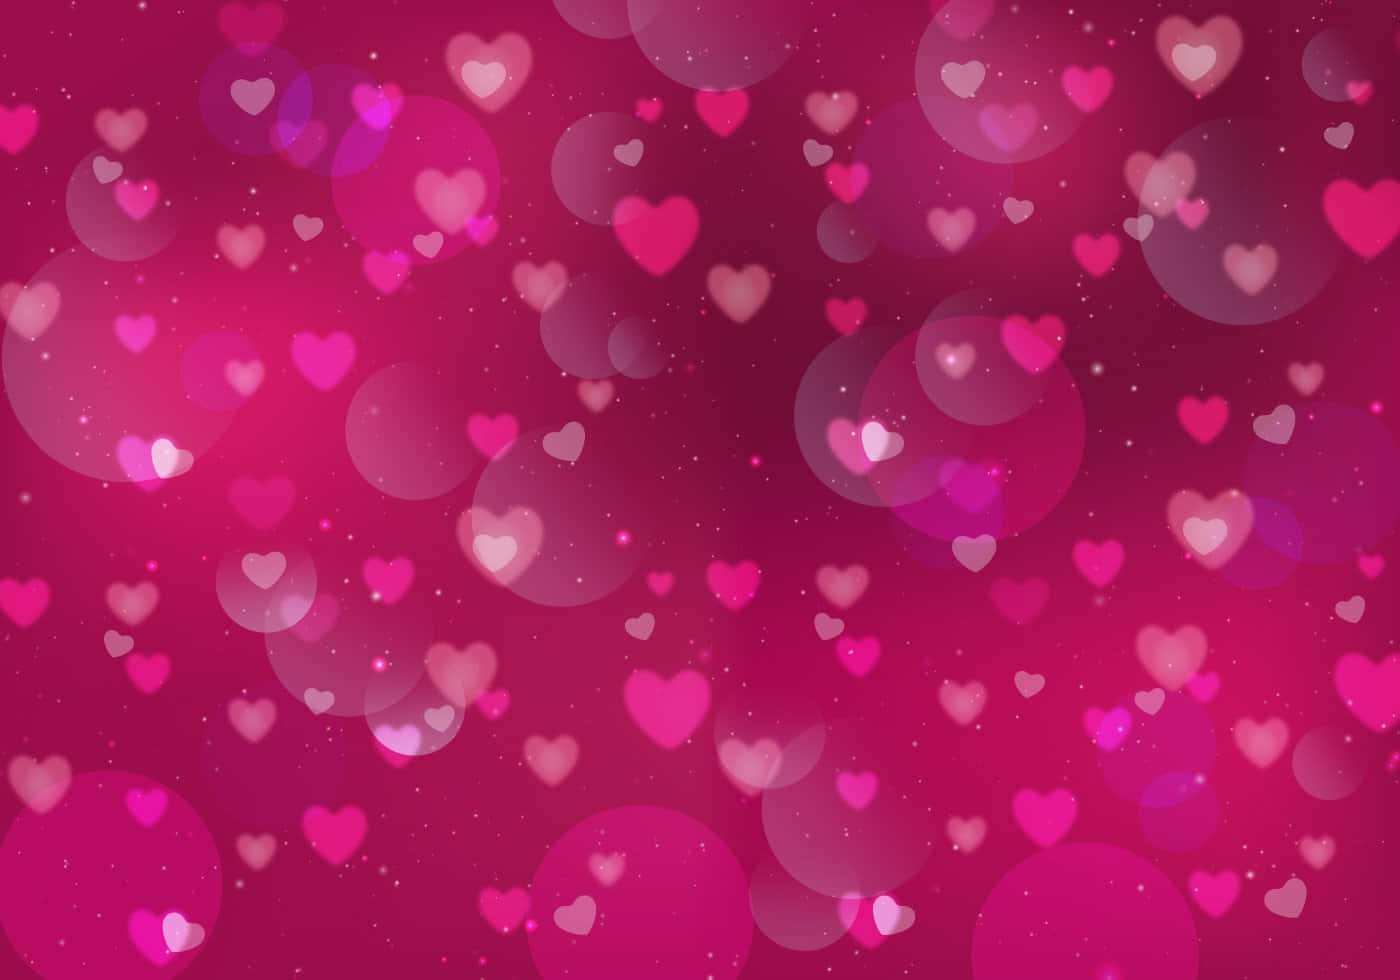 Romantic Pink Hearts Background Wallpaper